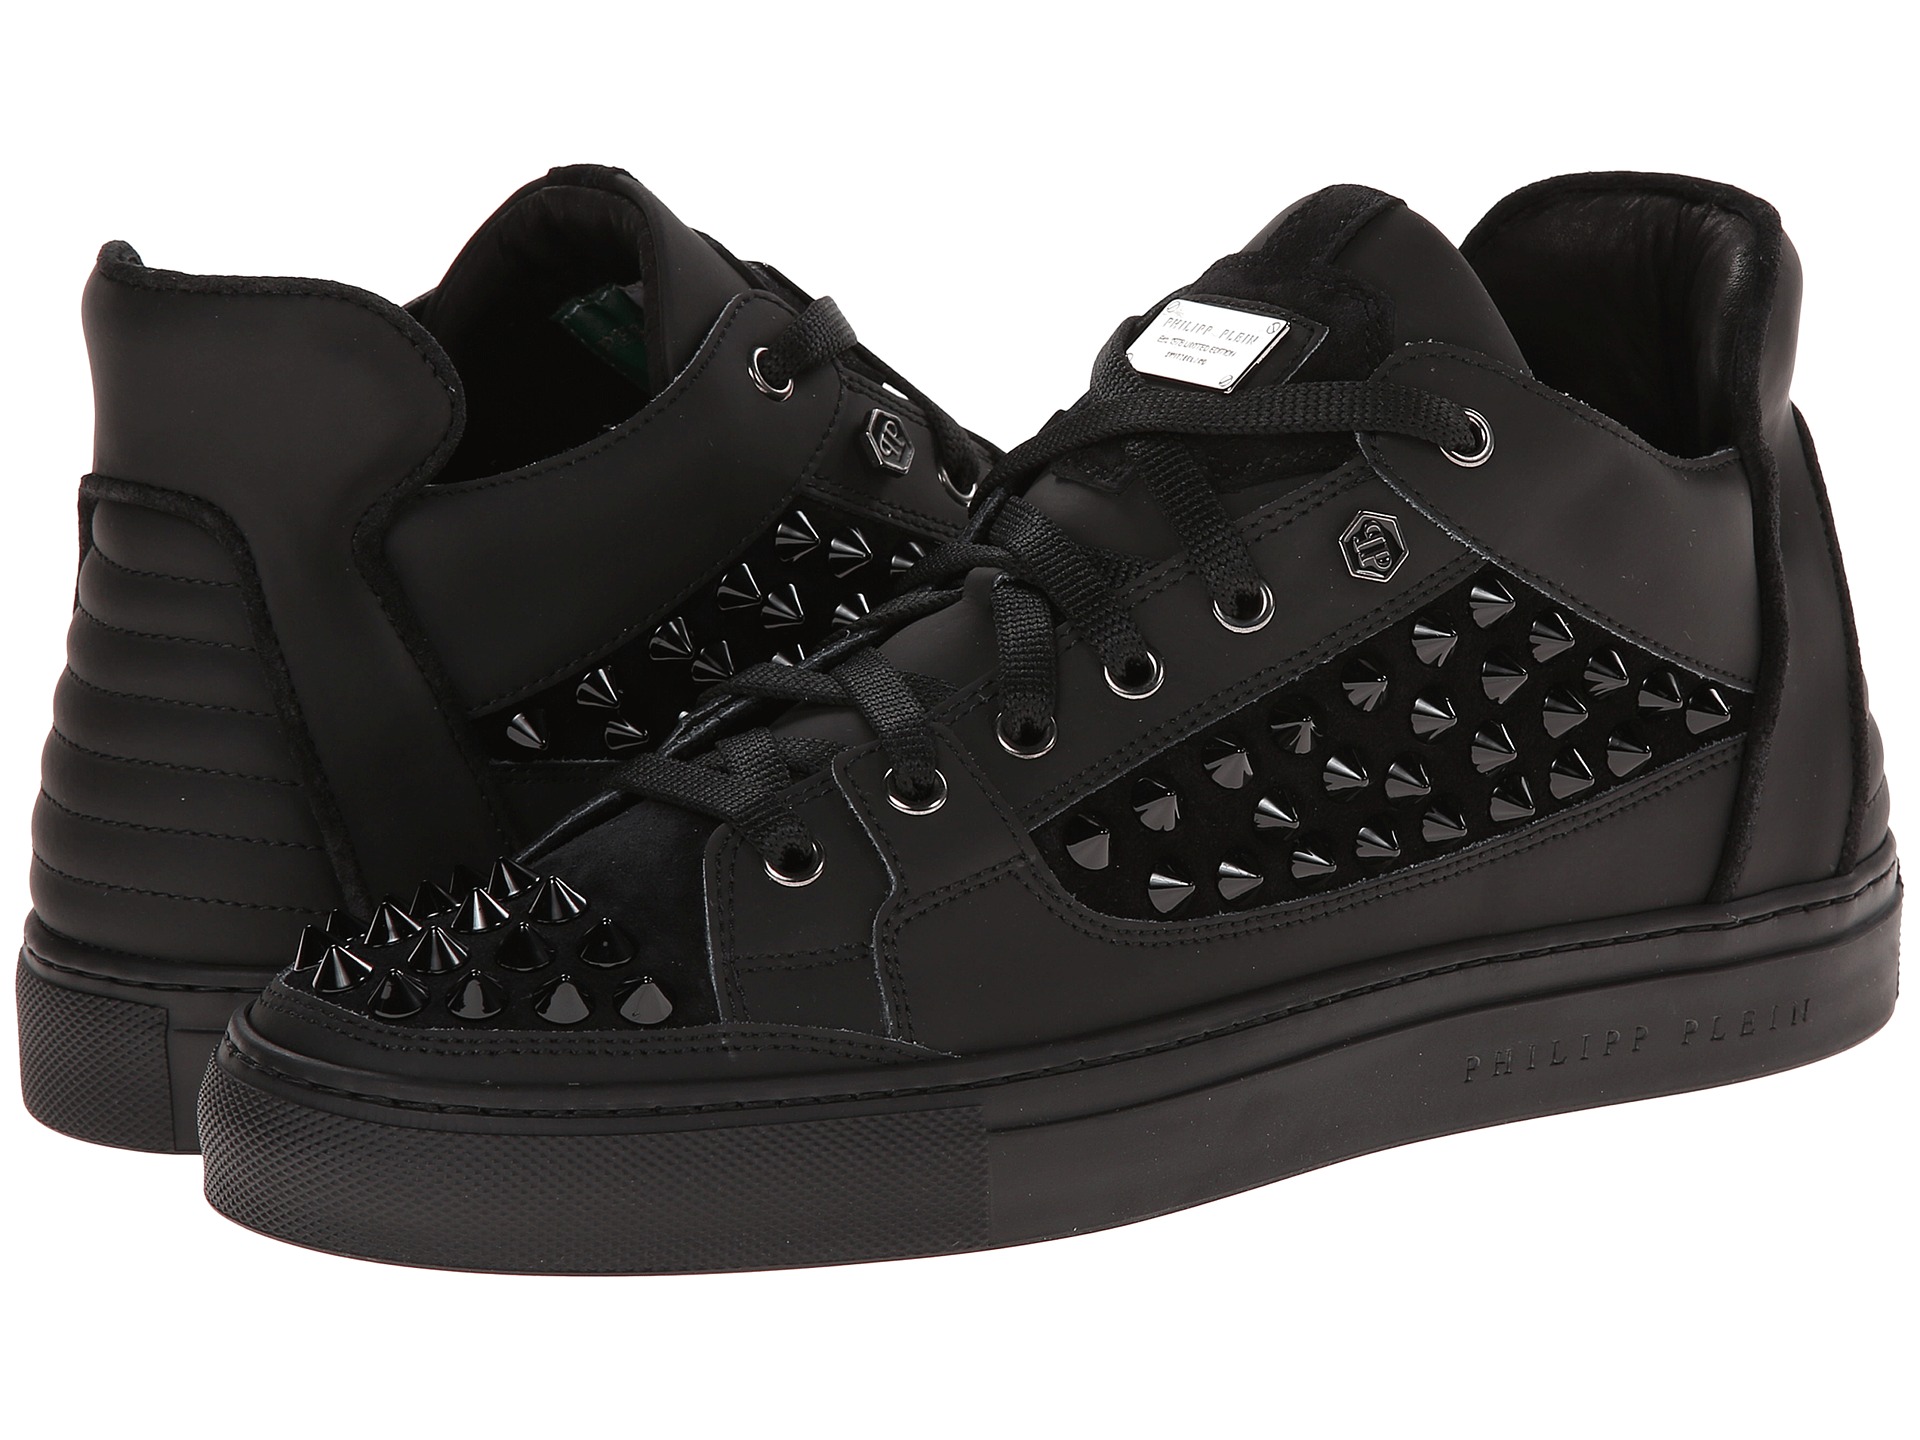 Philipp Plein Peter Sneakers, Shoes | Shipped Free at Zappos